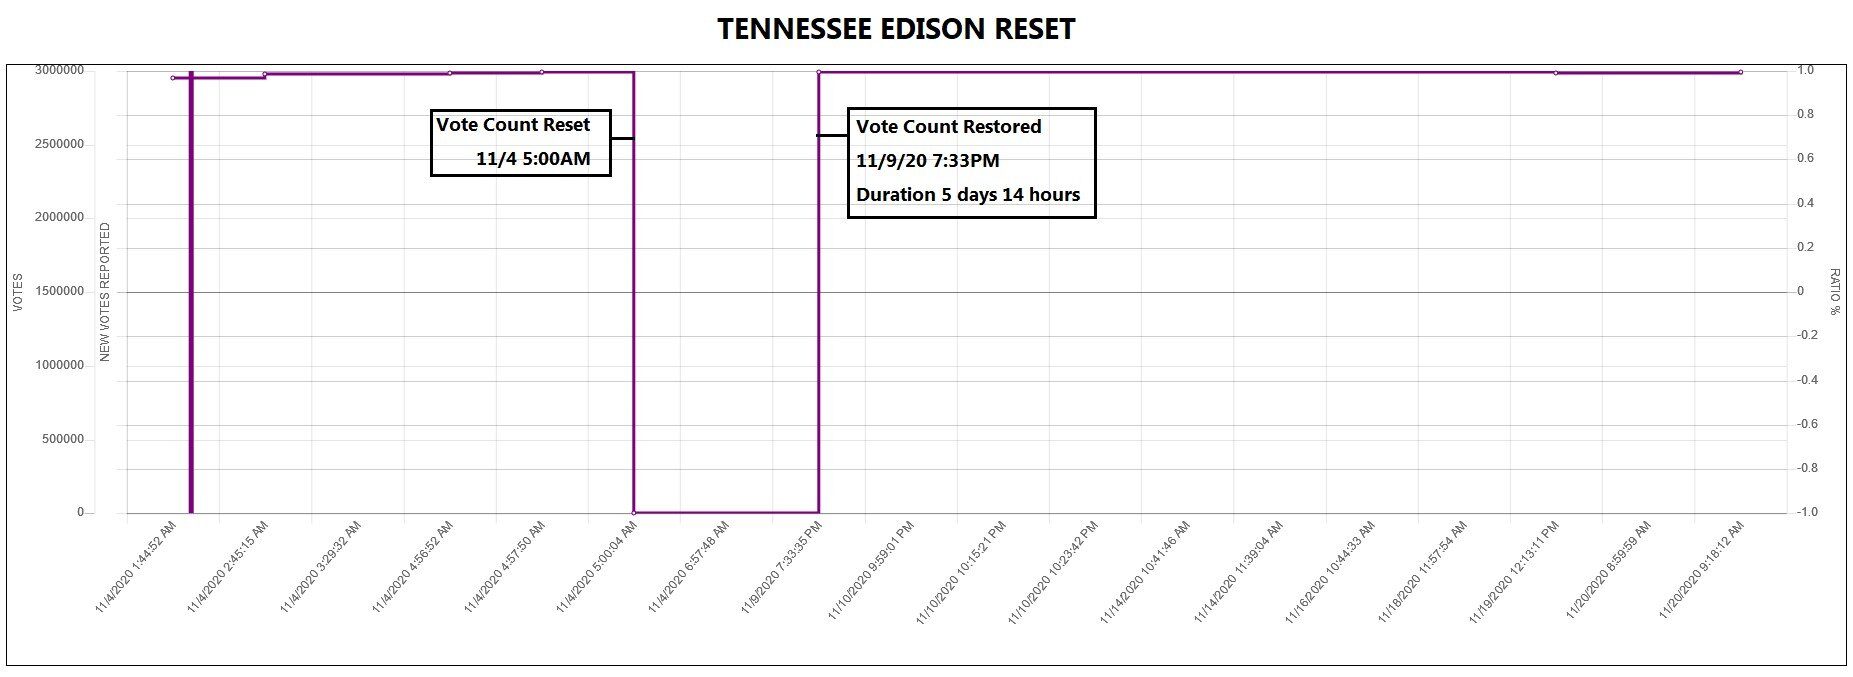 edison vote data zeroed out tennessee